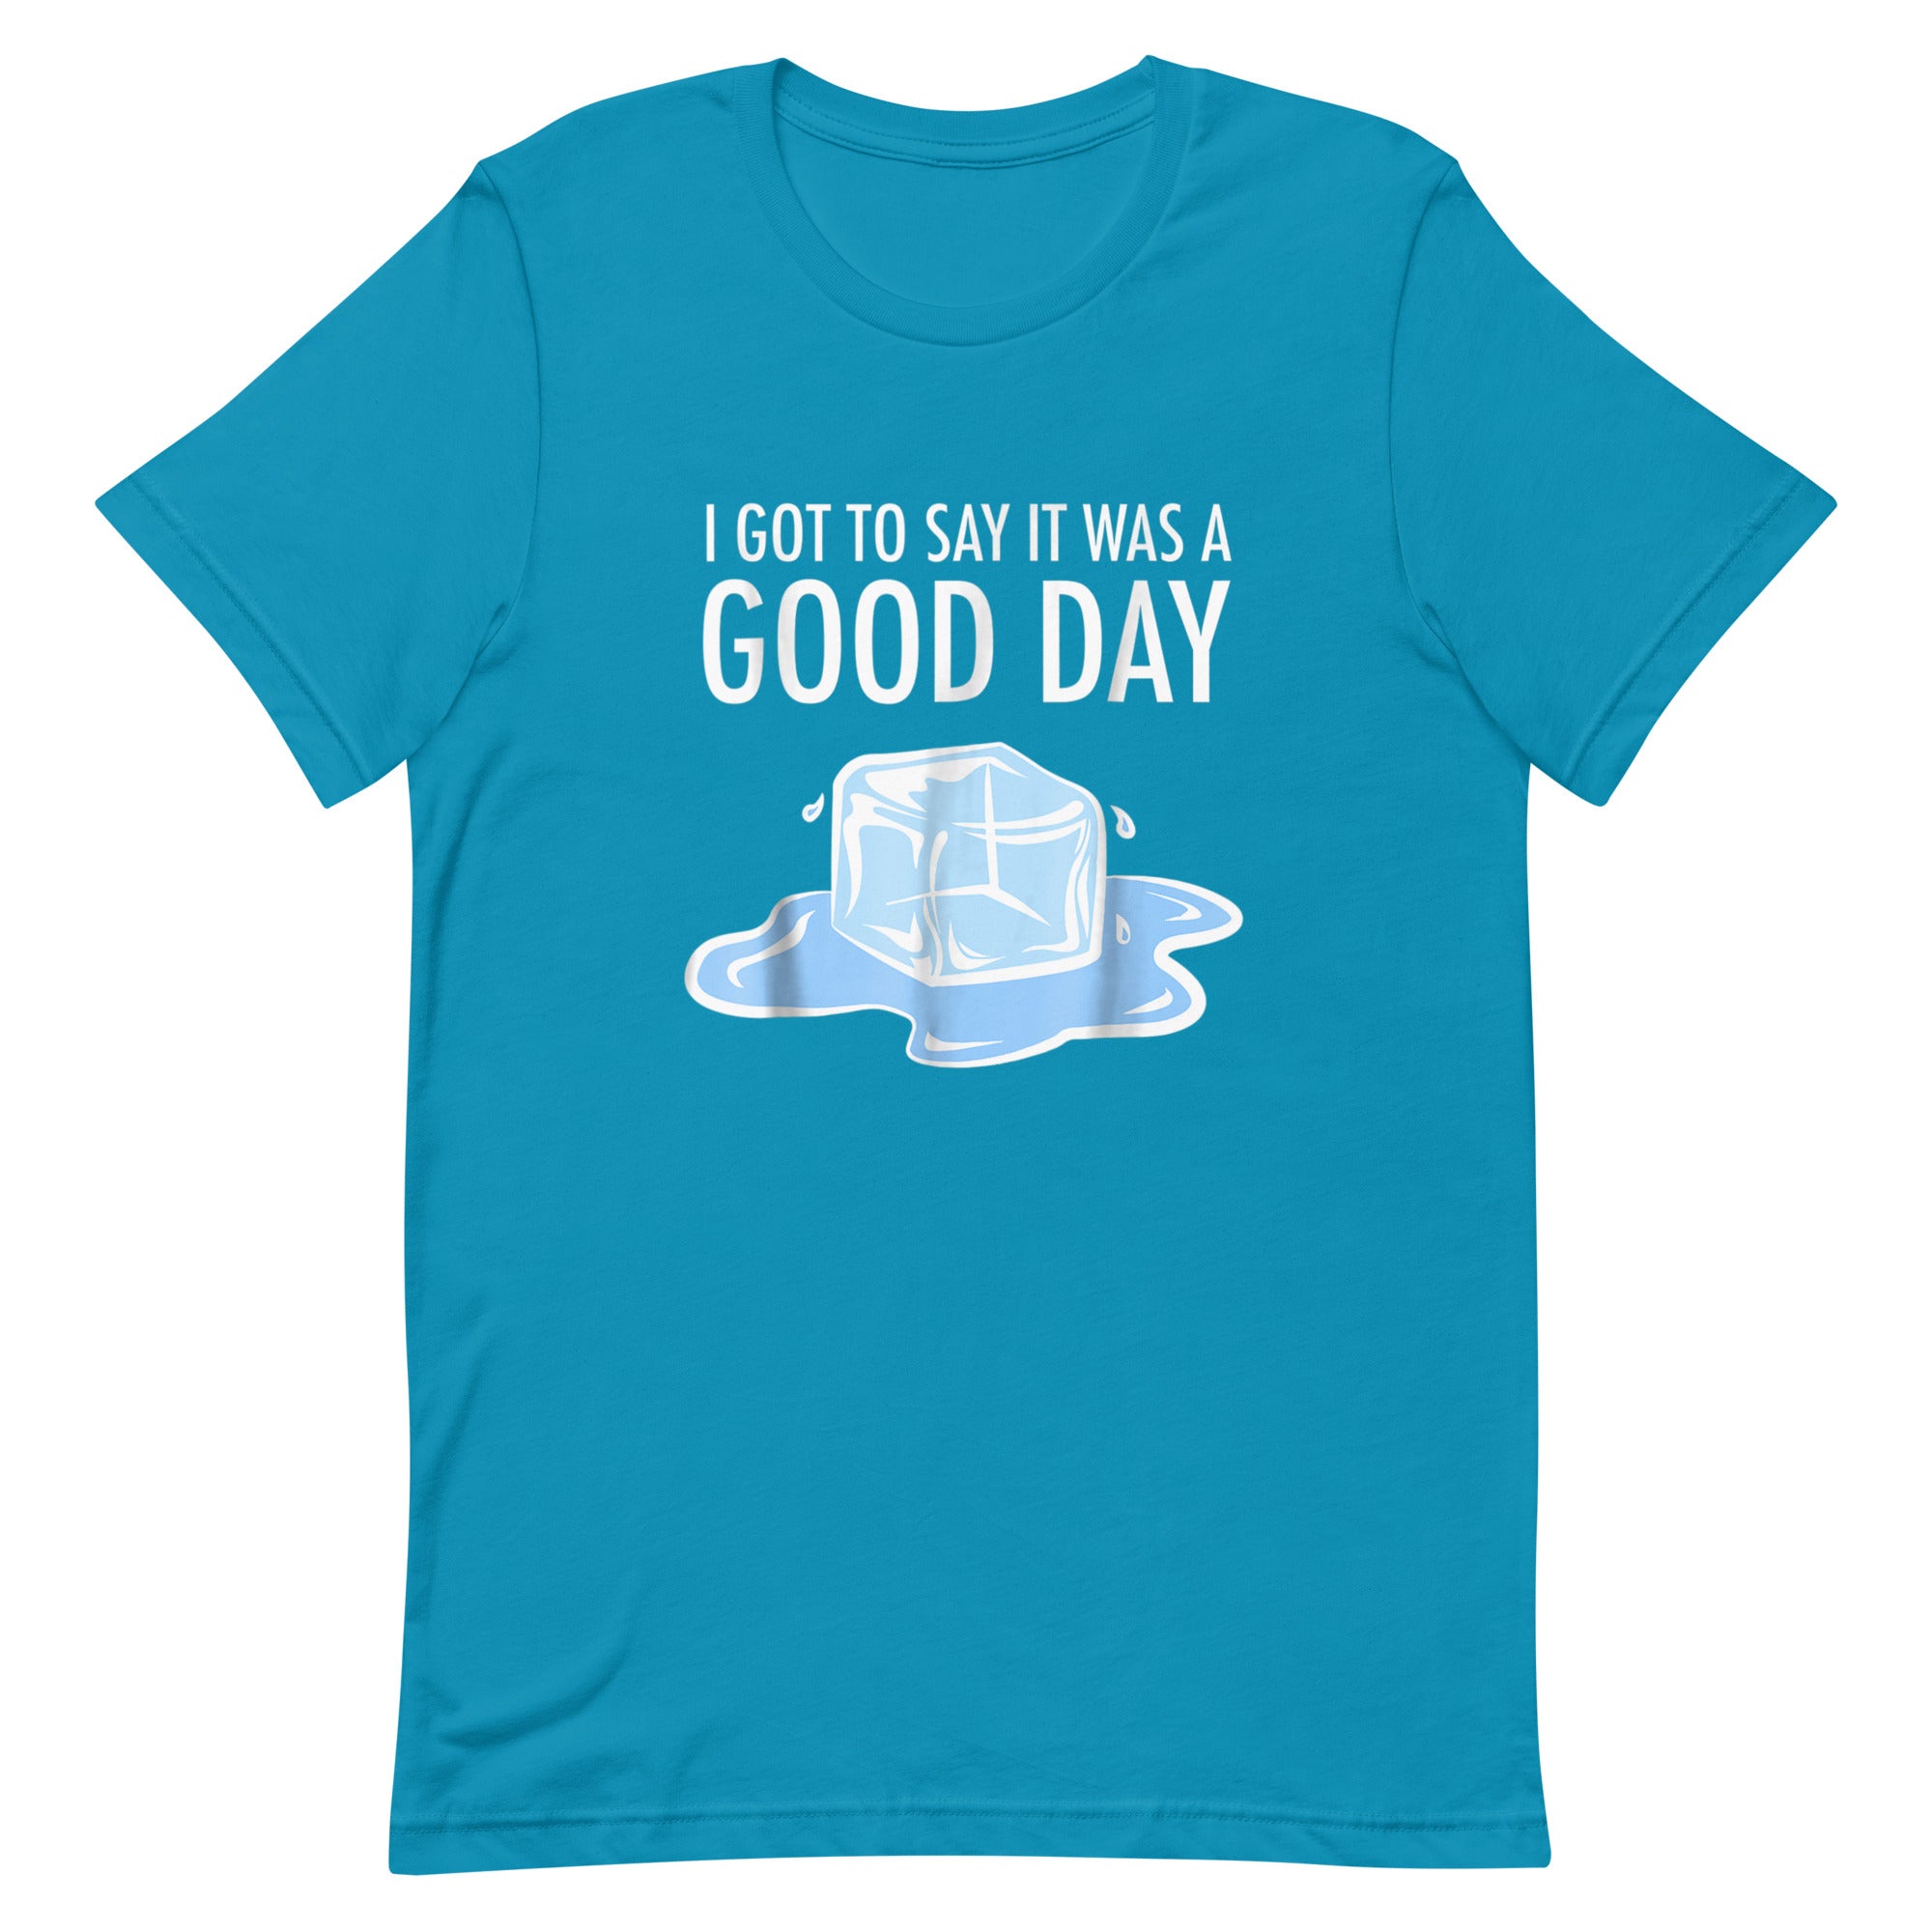 I GOT TO SAY ITS WAS A GOOD DAY Unisex t-shirt - Hiphopya